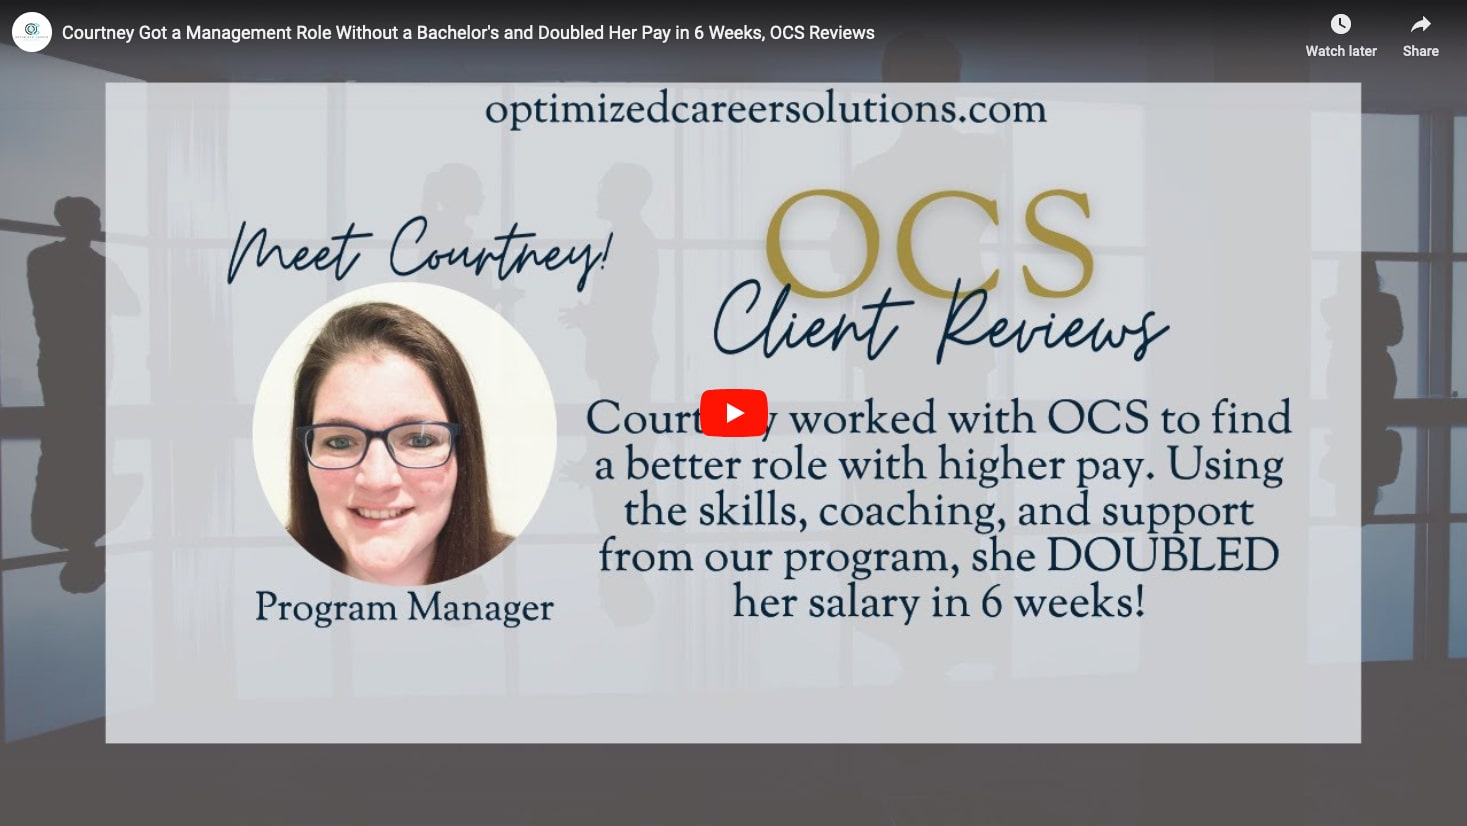 Courtney Got a Management Role Without a Bachelor's and Doubled Her Pay in 6 Weeks, OCS Reviews